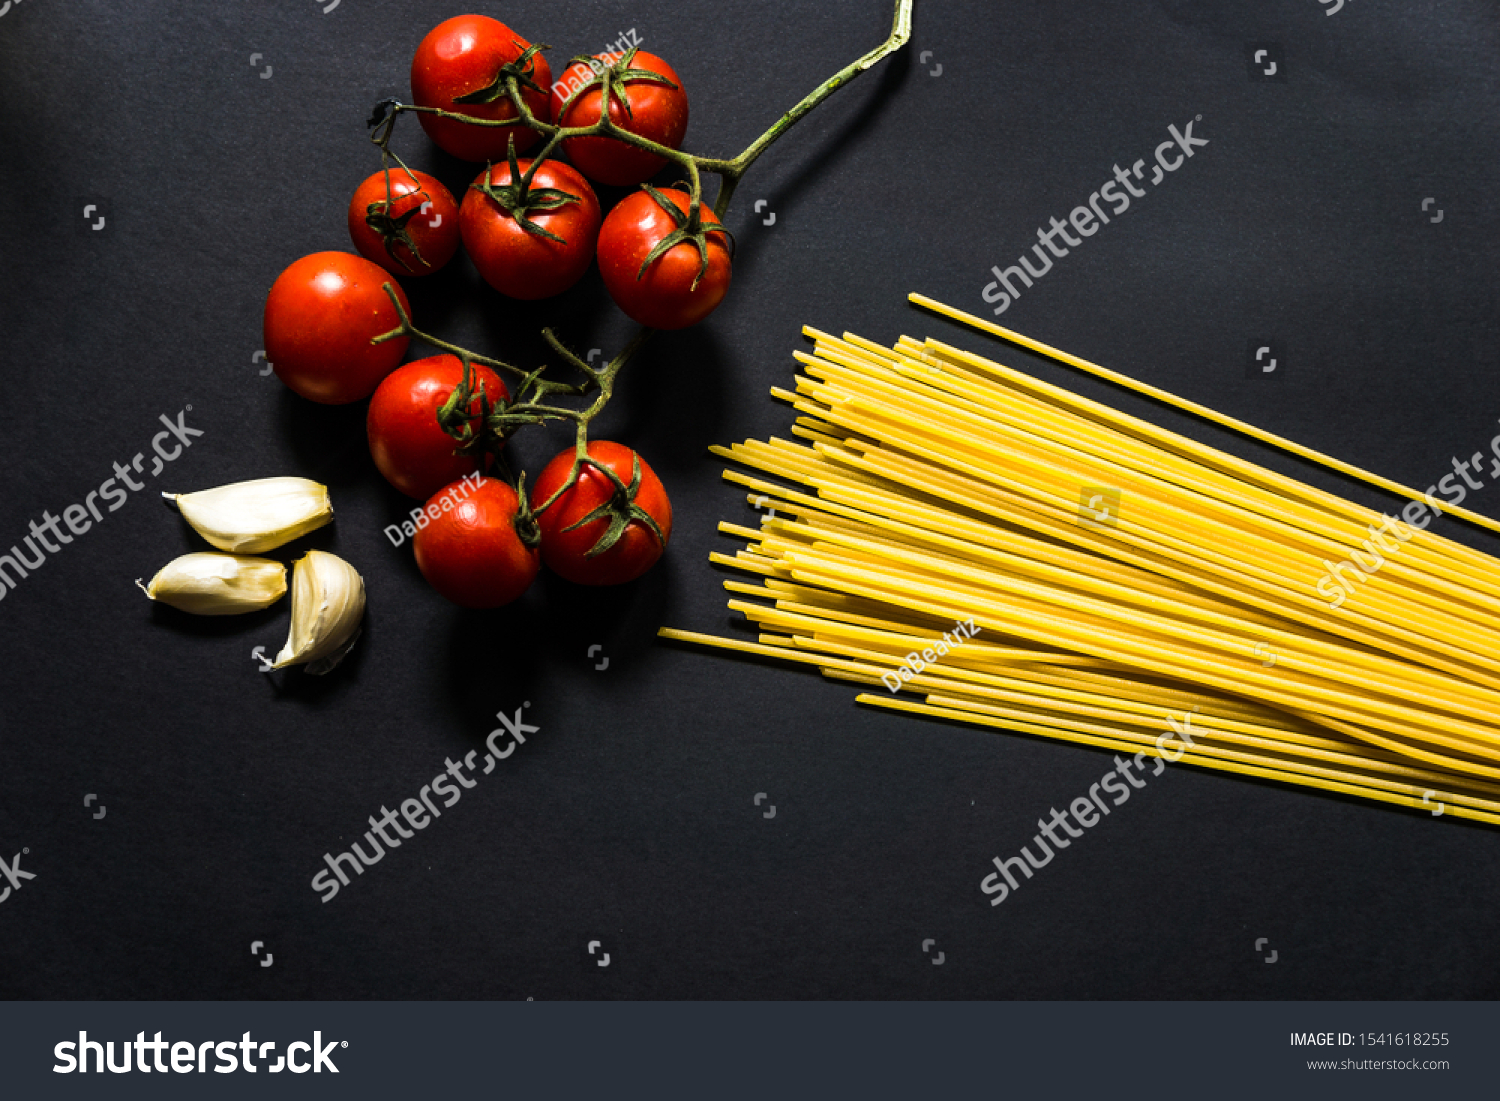 Mediterrannean cuisine and ingredients. Spaghetti with ingredients for cooking pasta on a black background #1541618255